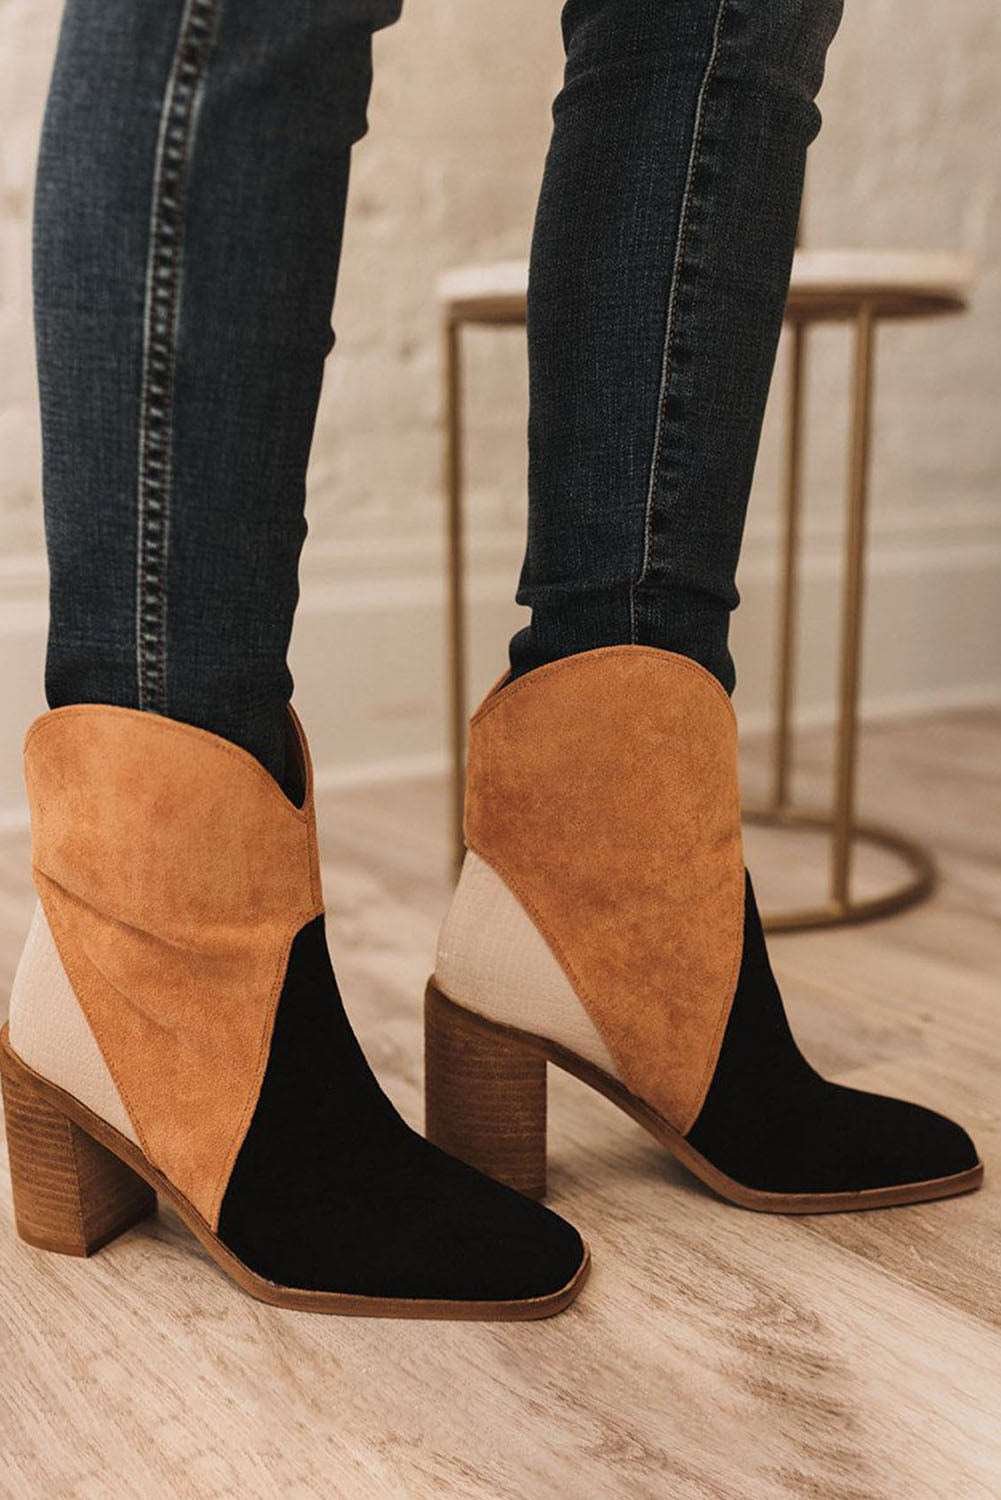 Black Colorblock Suede Heeled Ankle Booties - Bellisima Clothing Collective